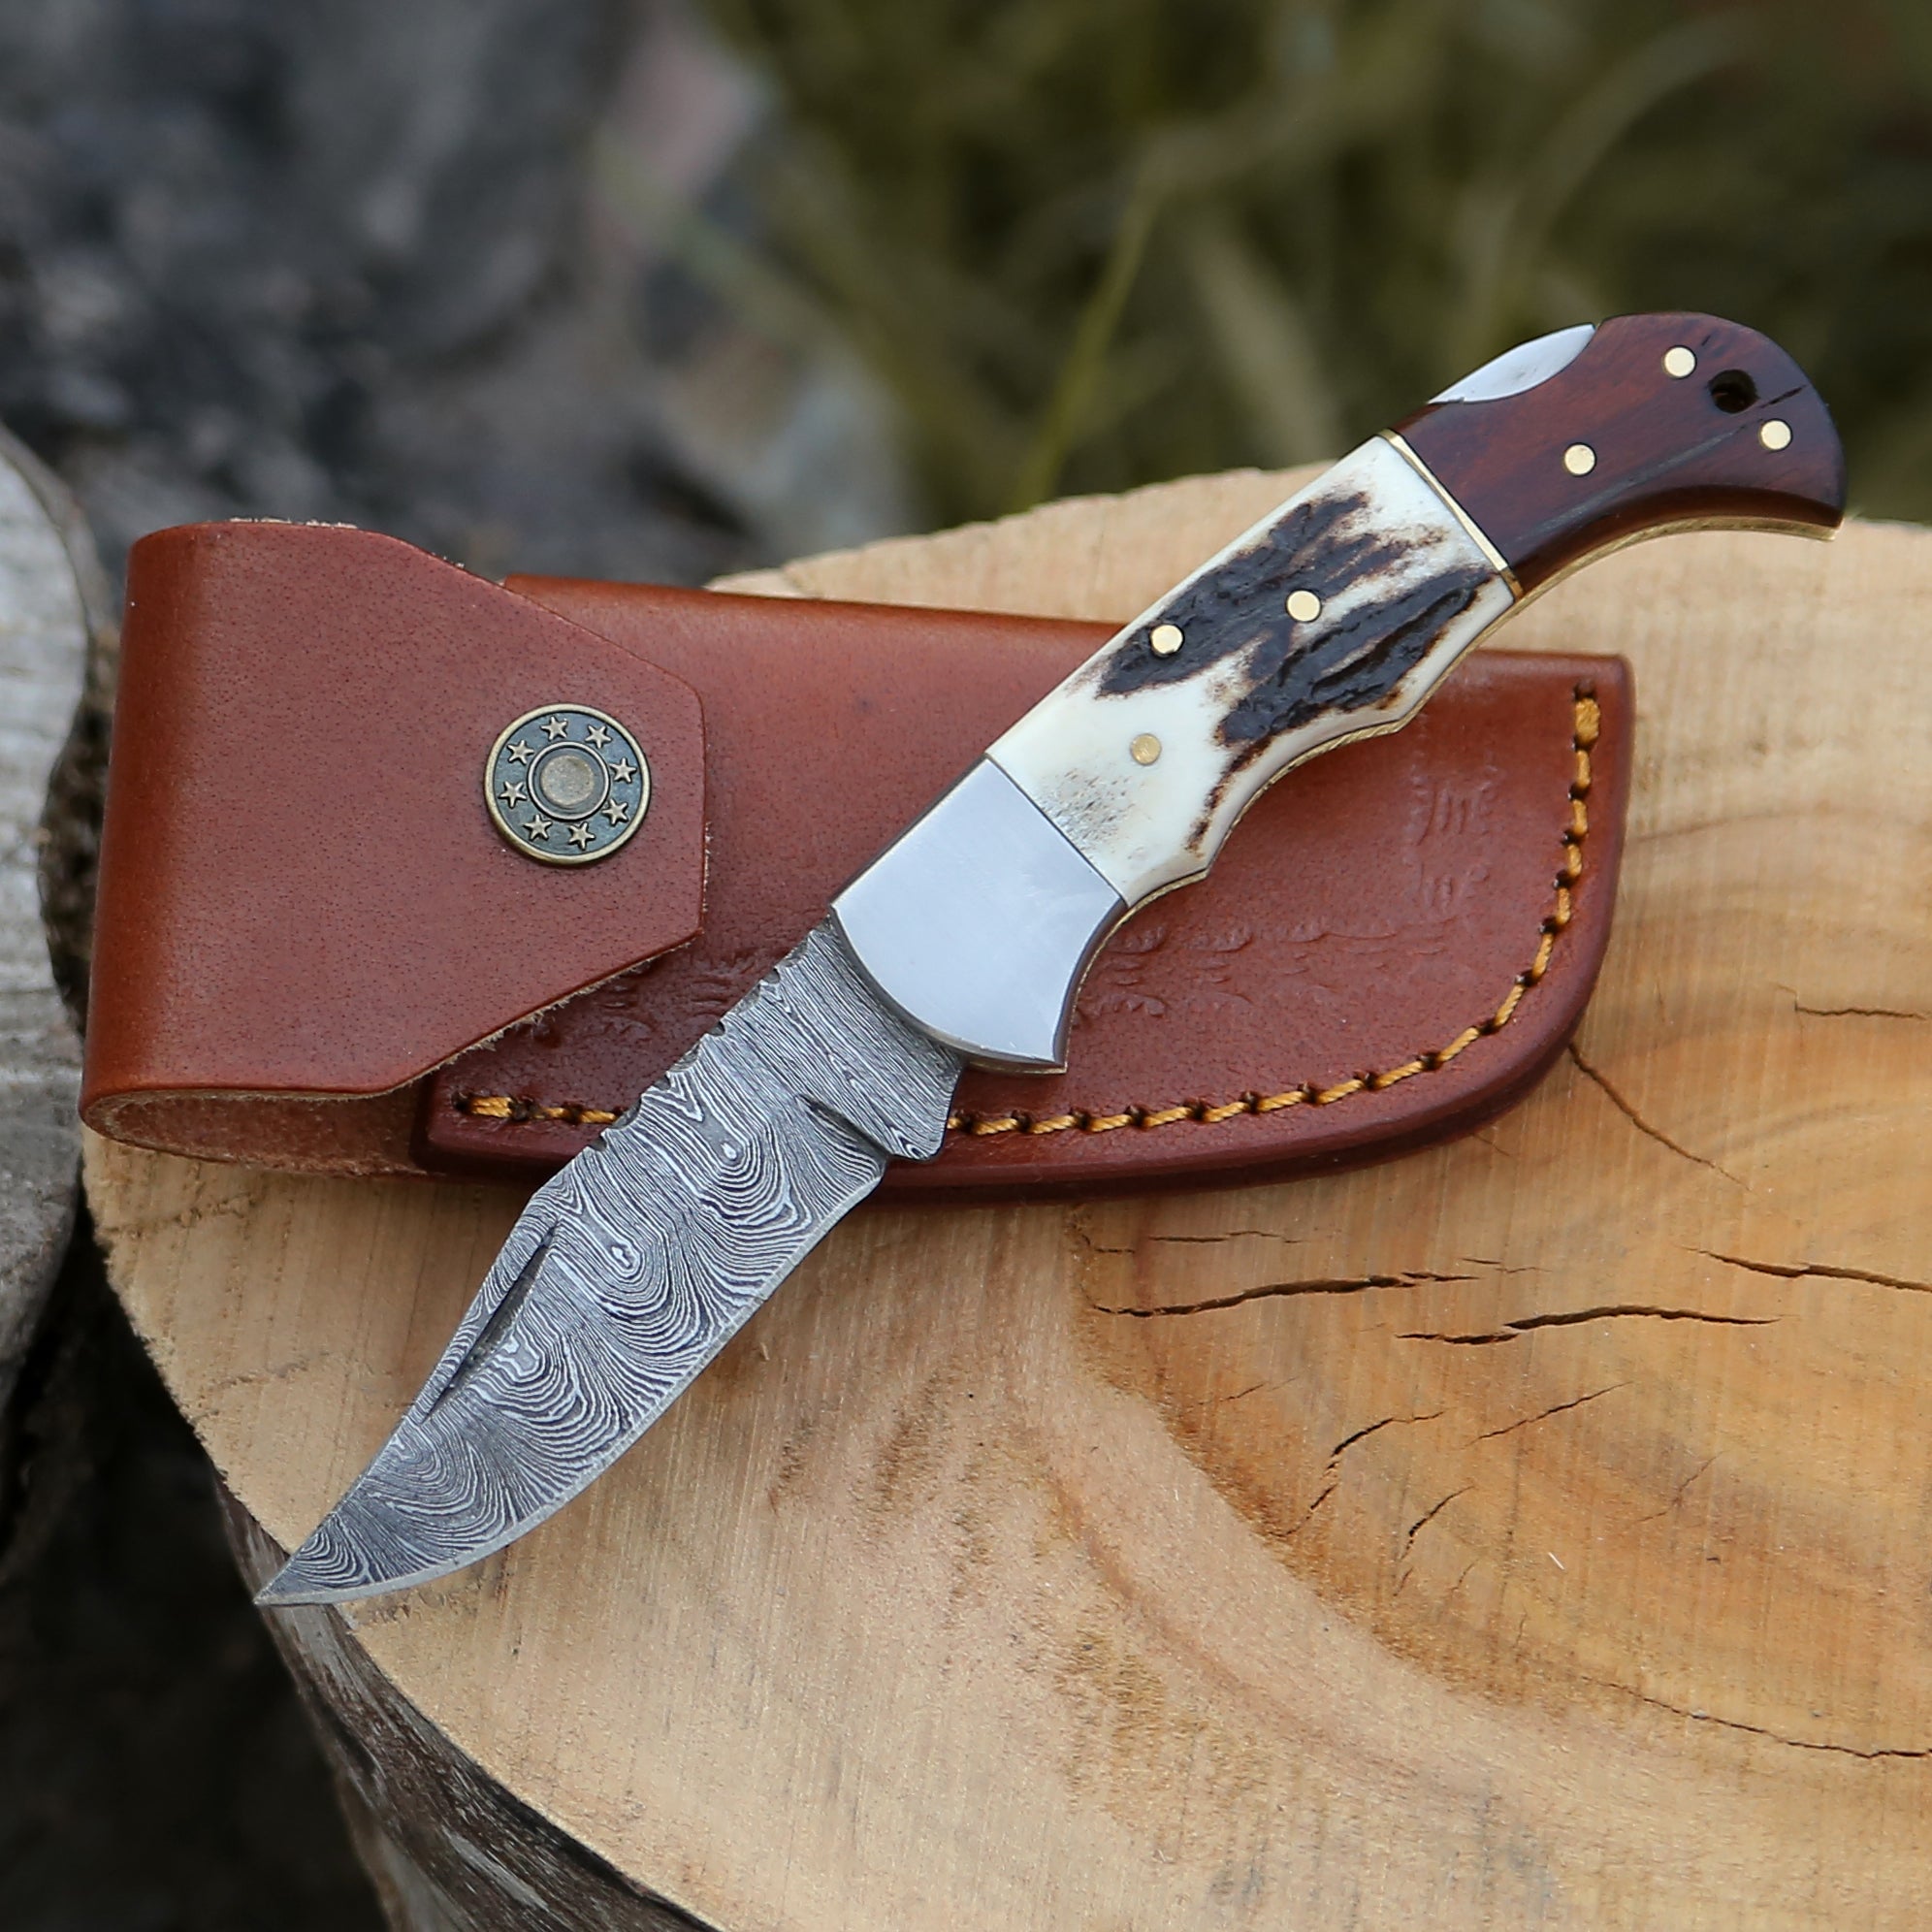 Stag 6.5" Handmade Damascus Steel Folding Knife Back Lock Pocket Knife With Leather Pouch Personalized Gift for Men.